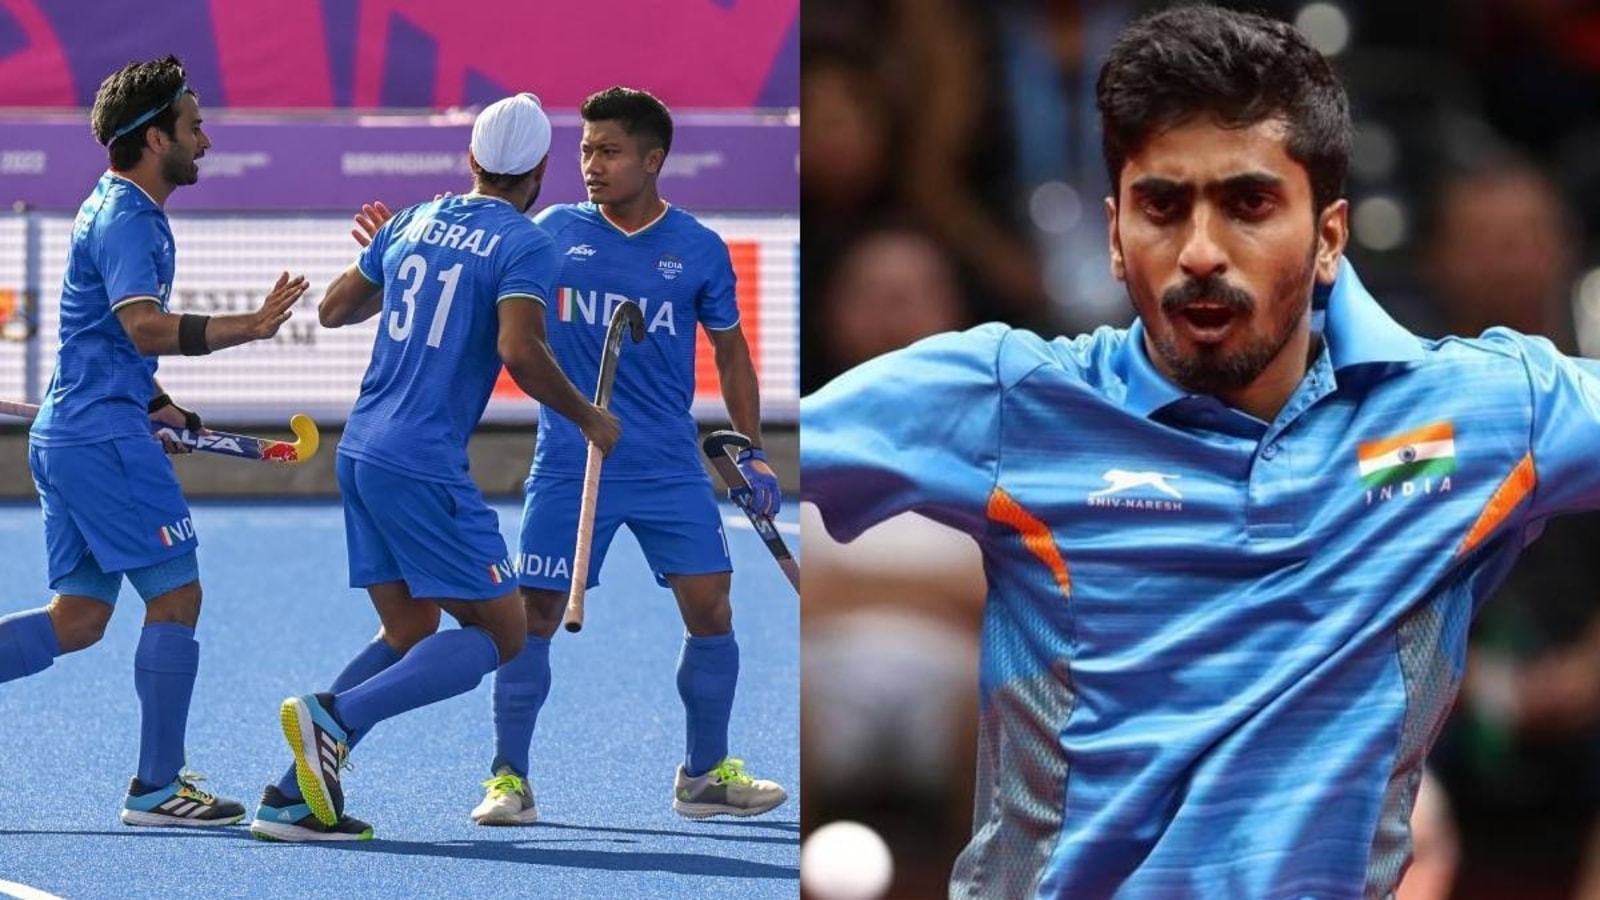 Commonwealth Games 2022 Day 4 India Full Schedule: What is IND's